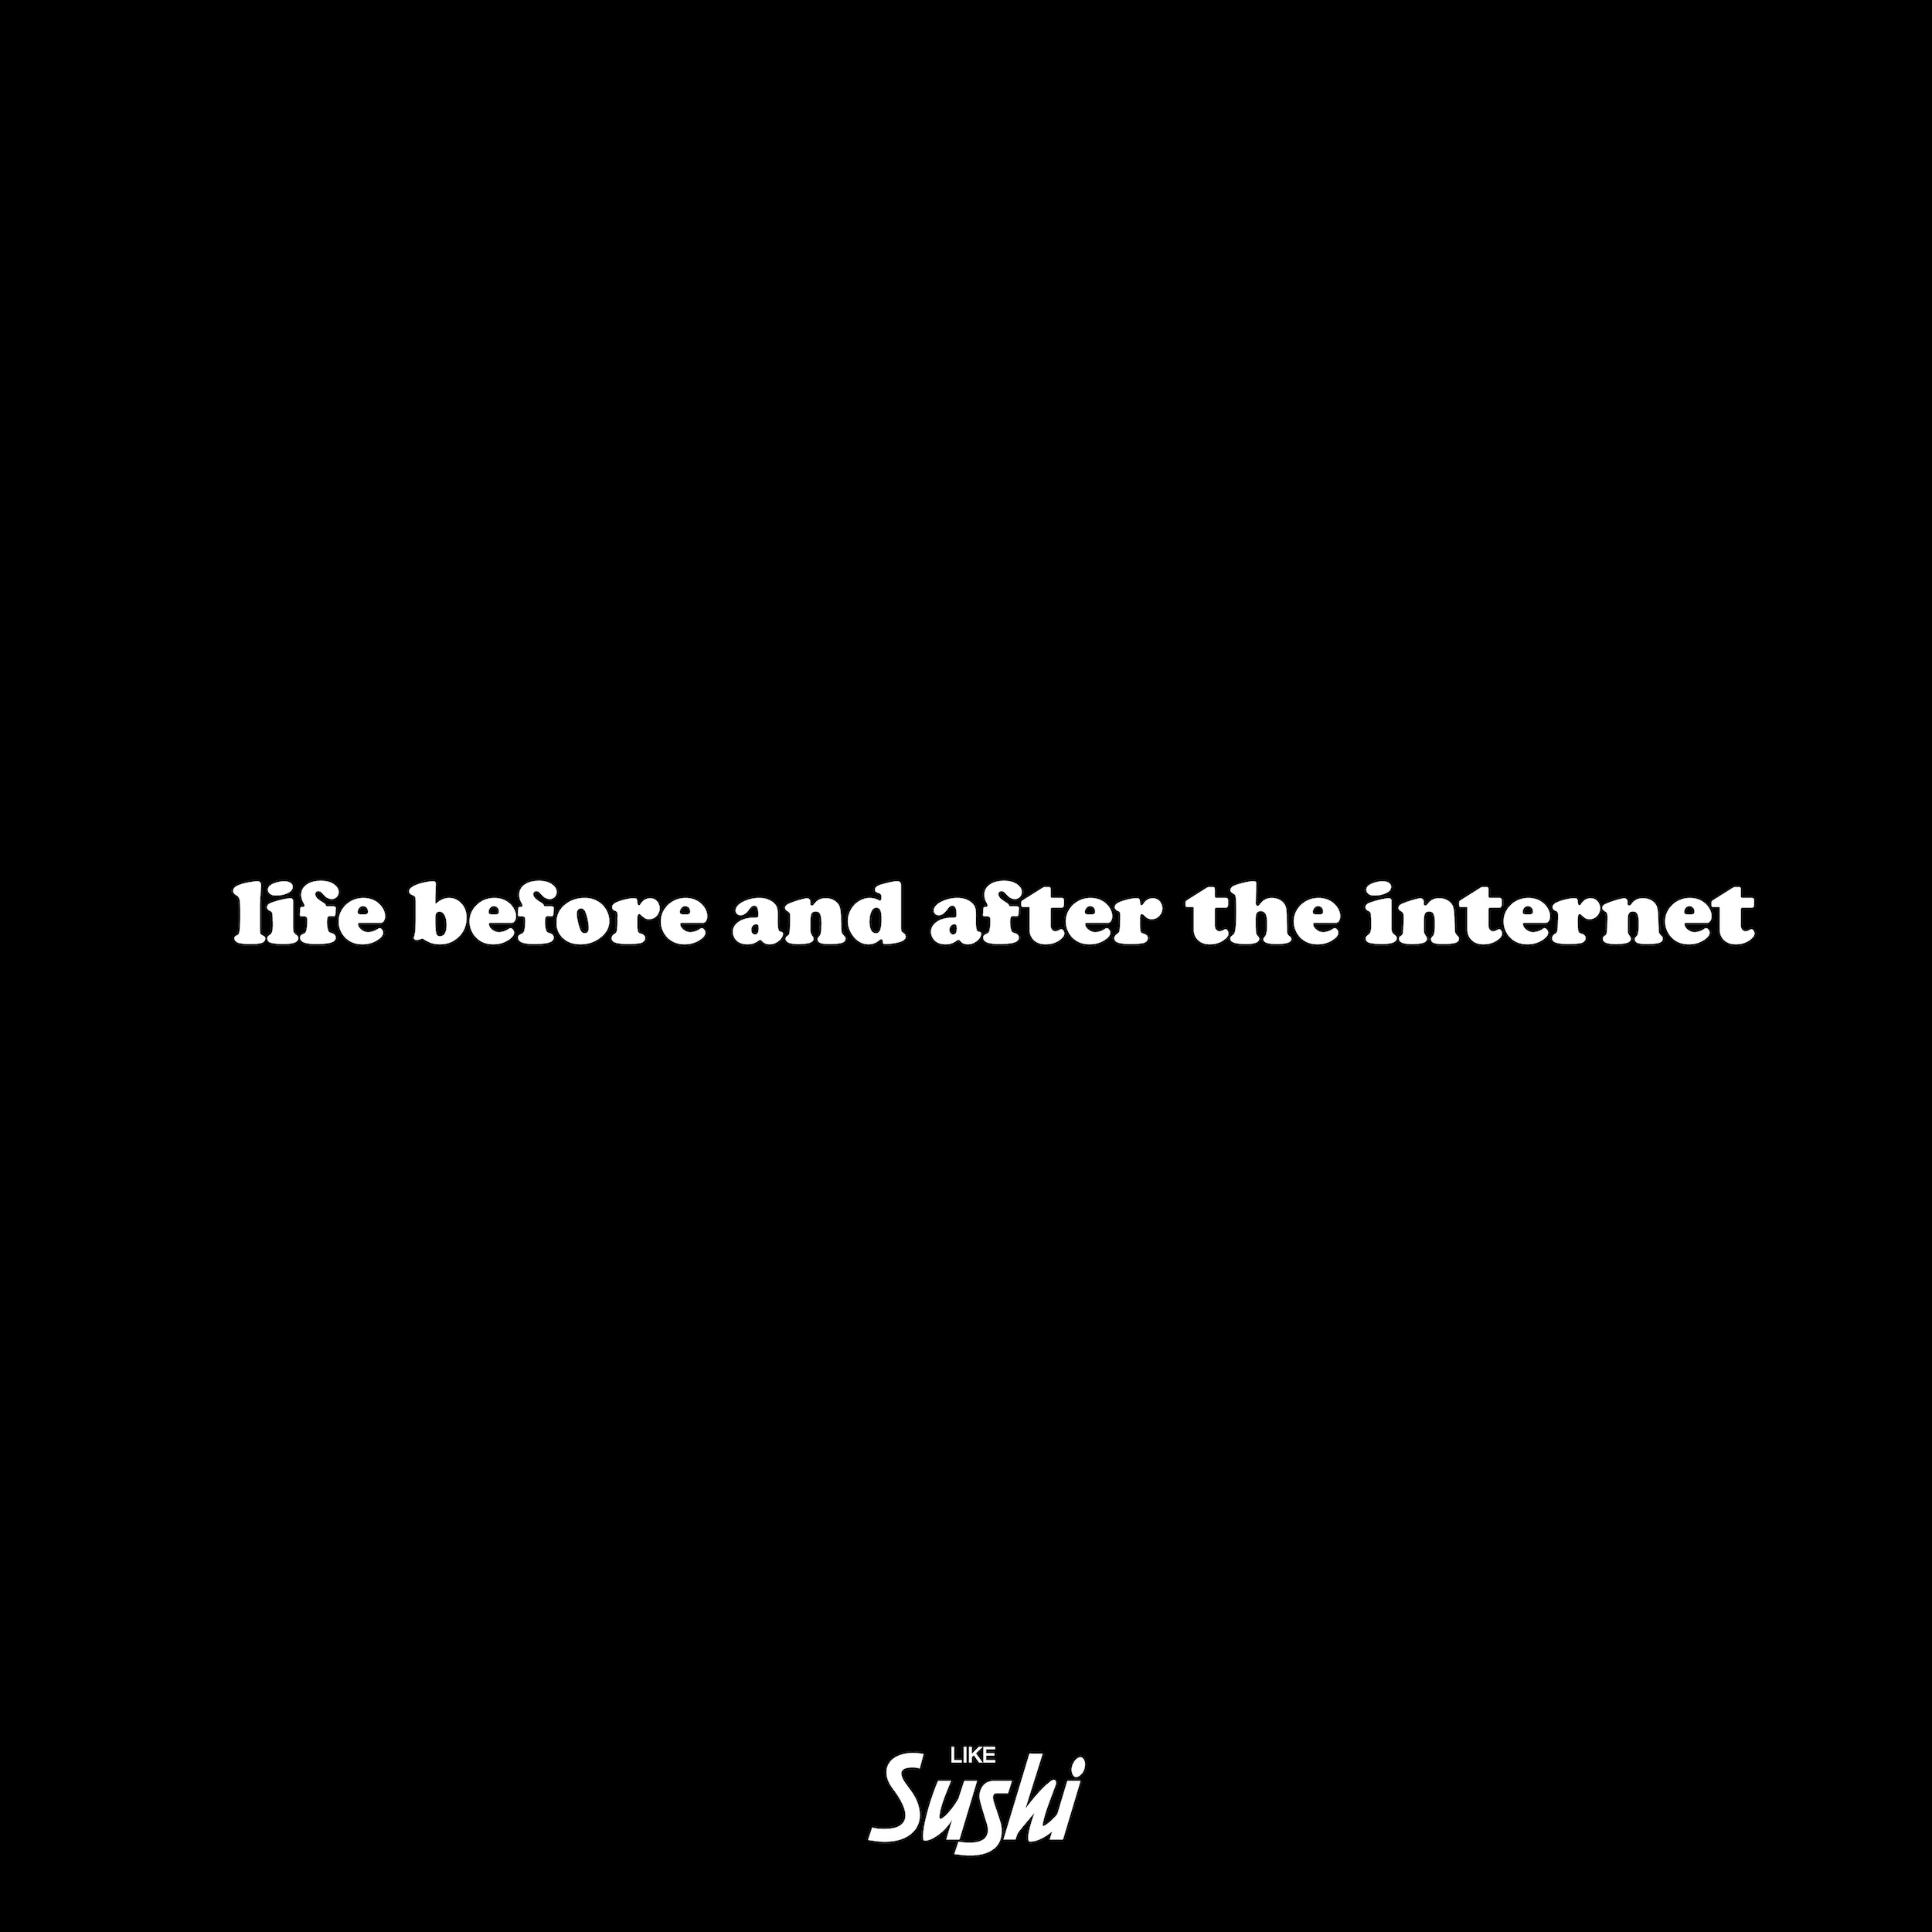 life before and after the internet